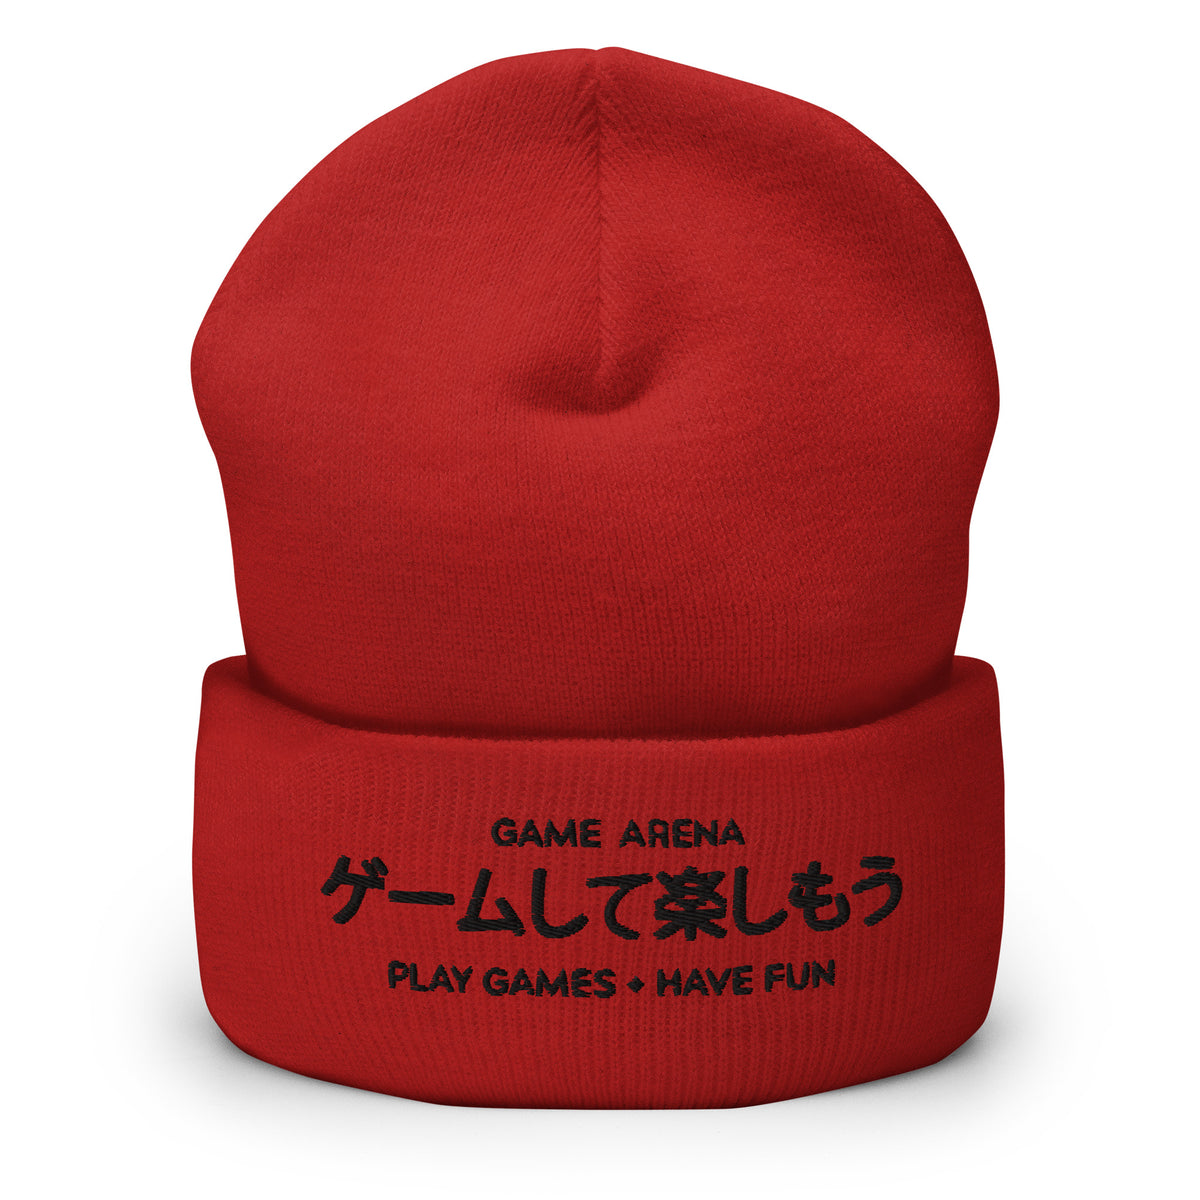 Game Arena Season 1 | On Demand | Embroidered Game & Have Fun! Cuffed Beanie - Red